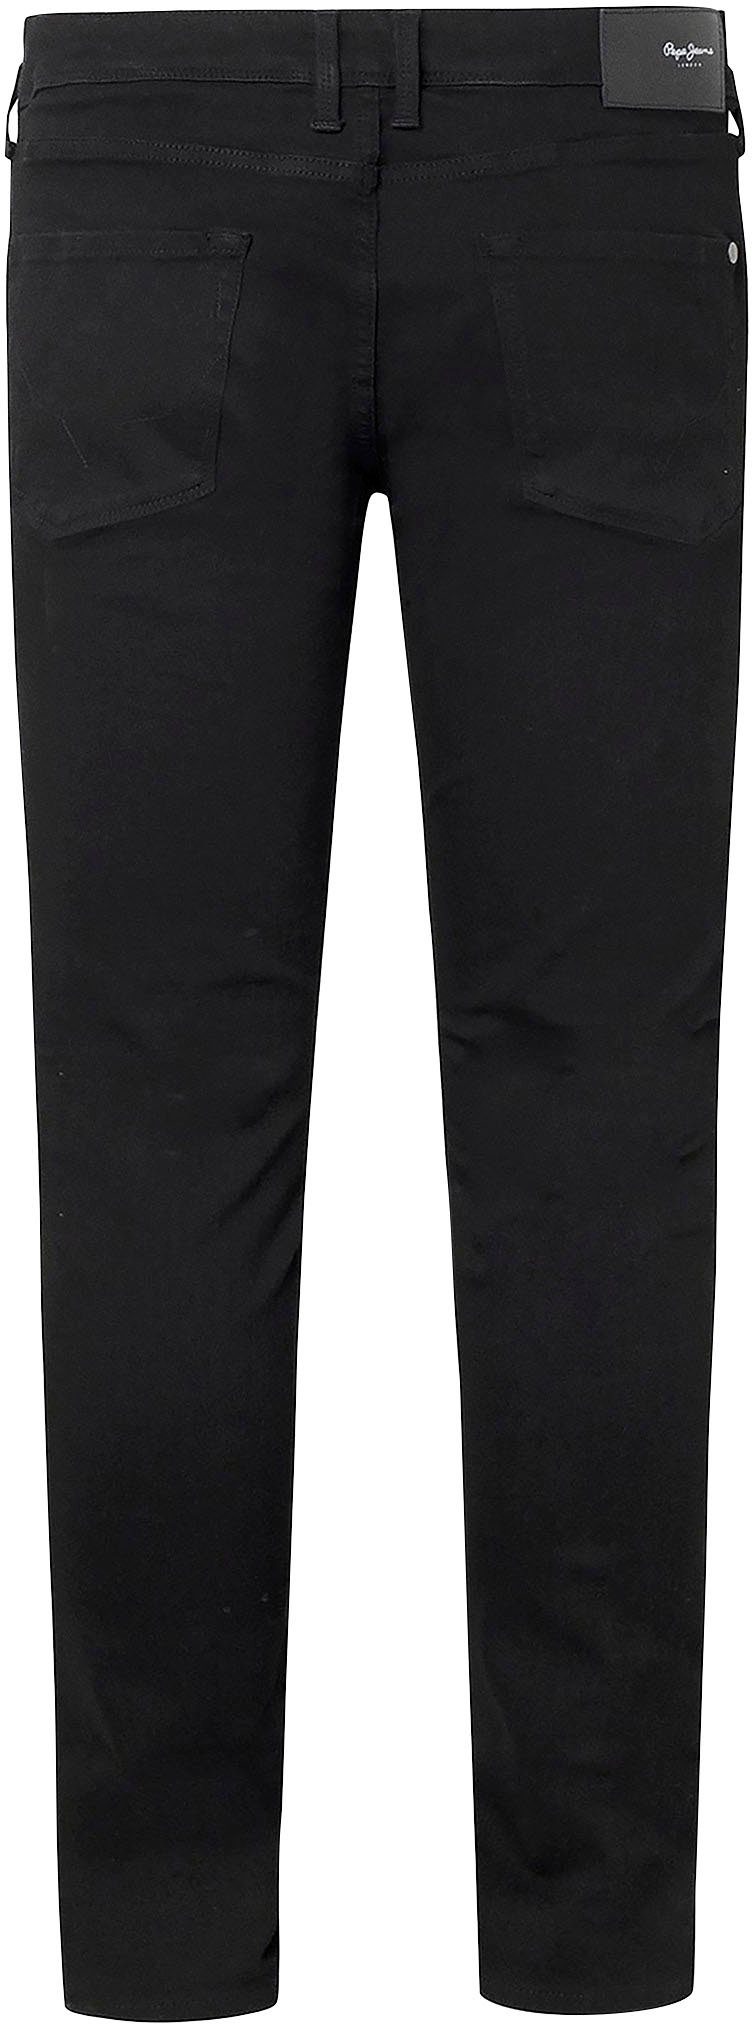 Jeans Finsbury Skinny-fit-Jeans Pepe cleanblack